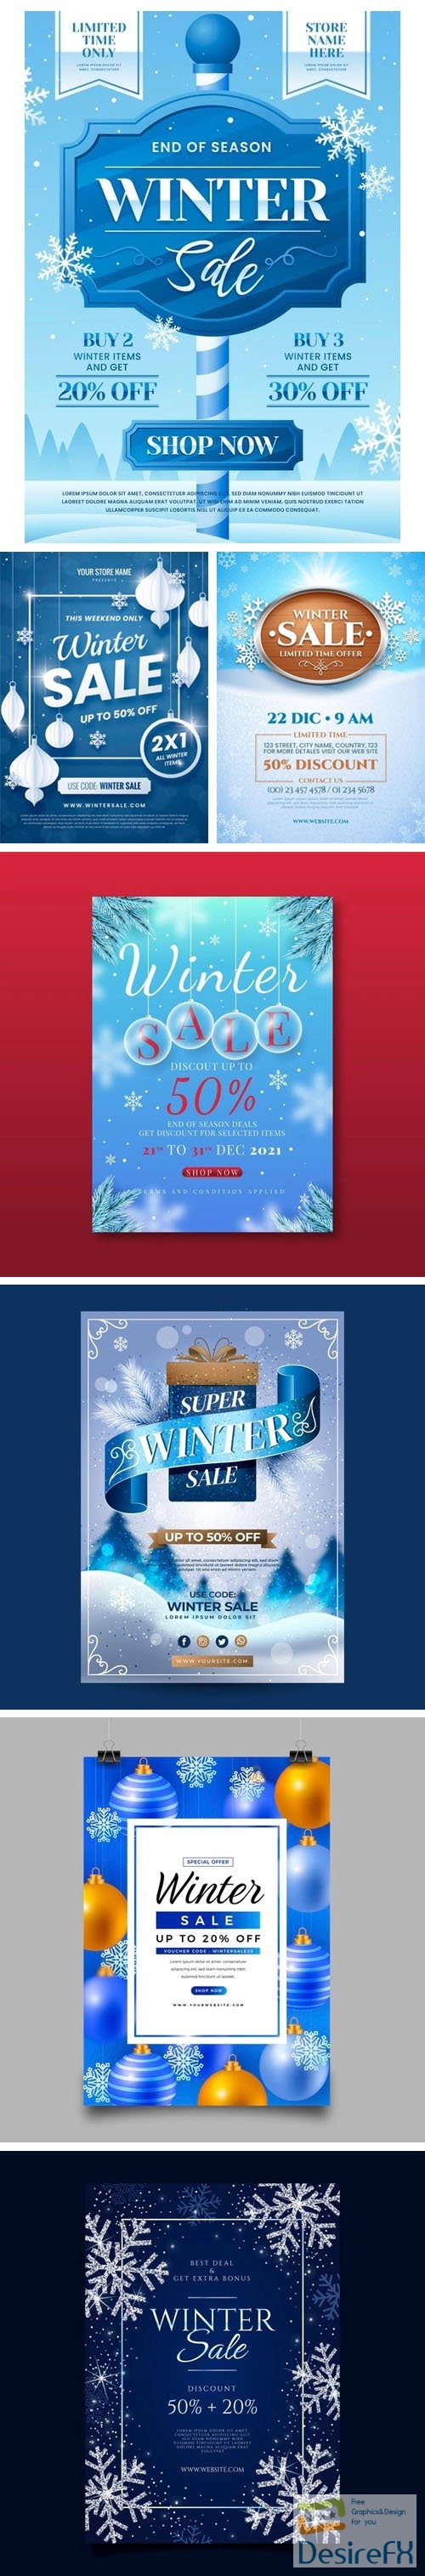 Winter Sale Posters Vector Templates